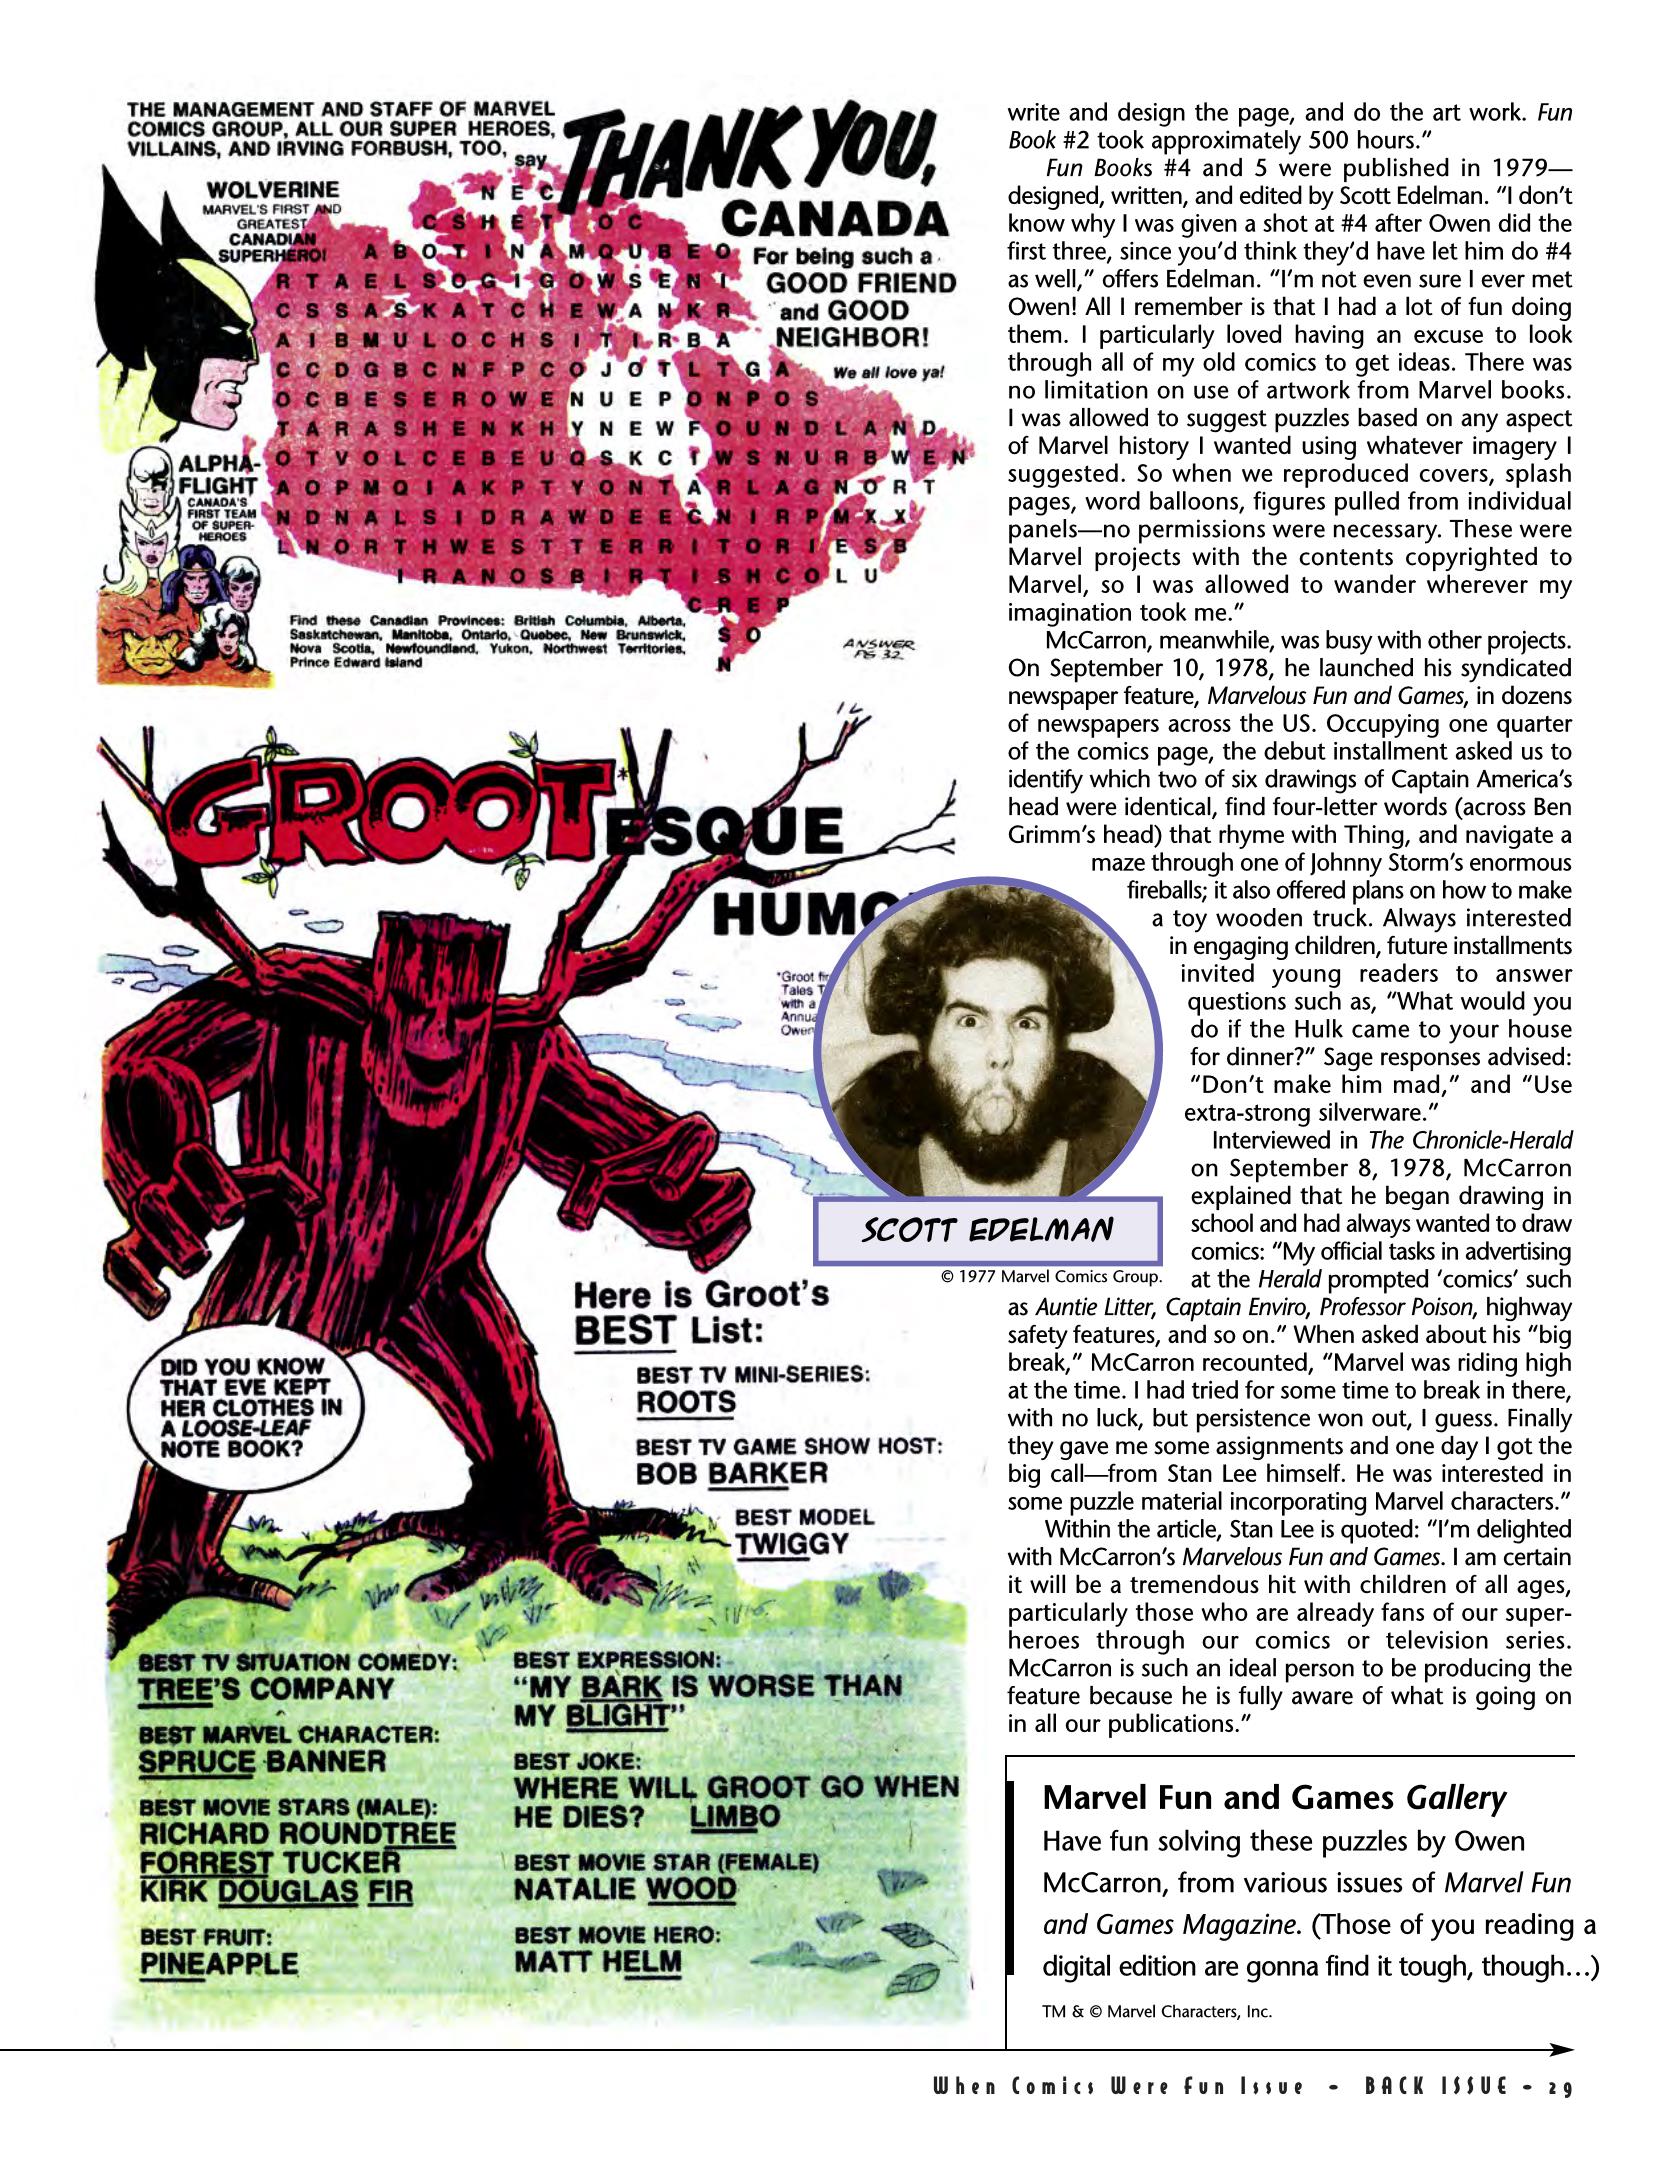 Read online Back Issue comic -  Issue #77 - 25